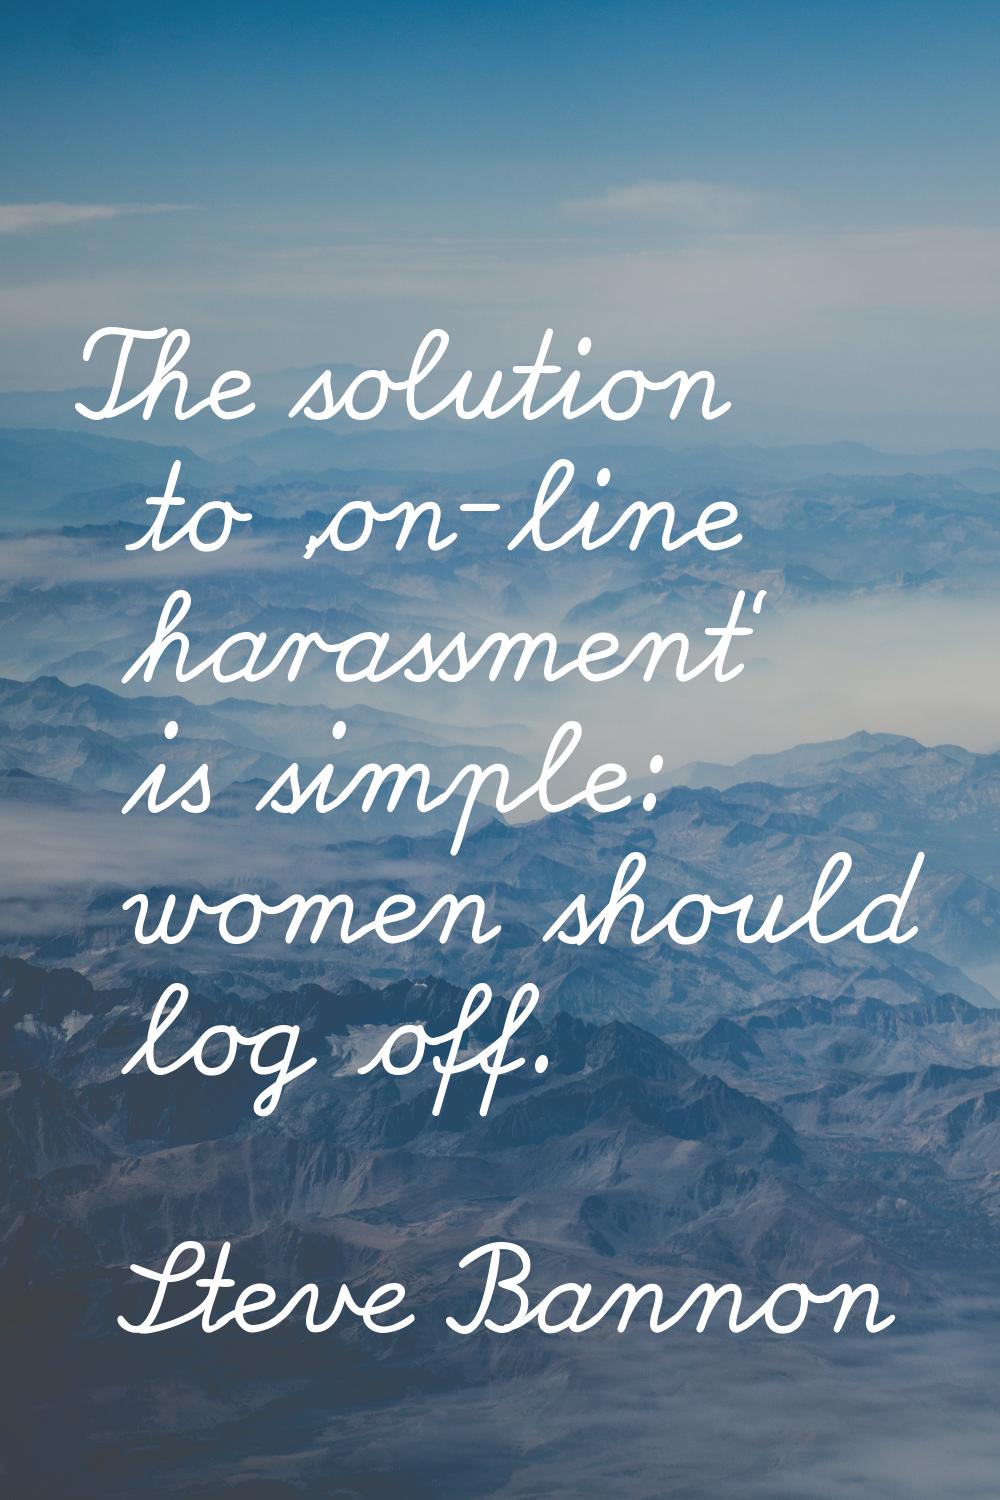 The solution to 'on-line harassment' is simple: women should log off.